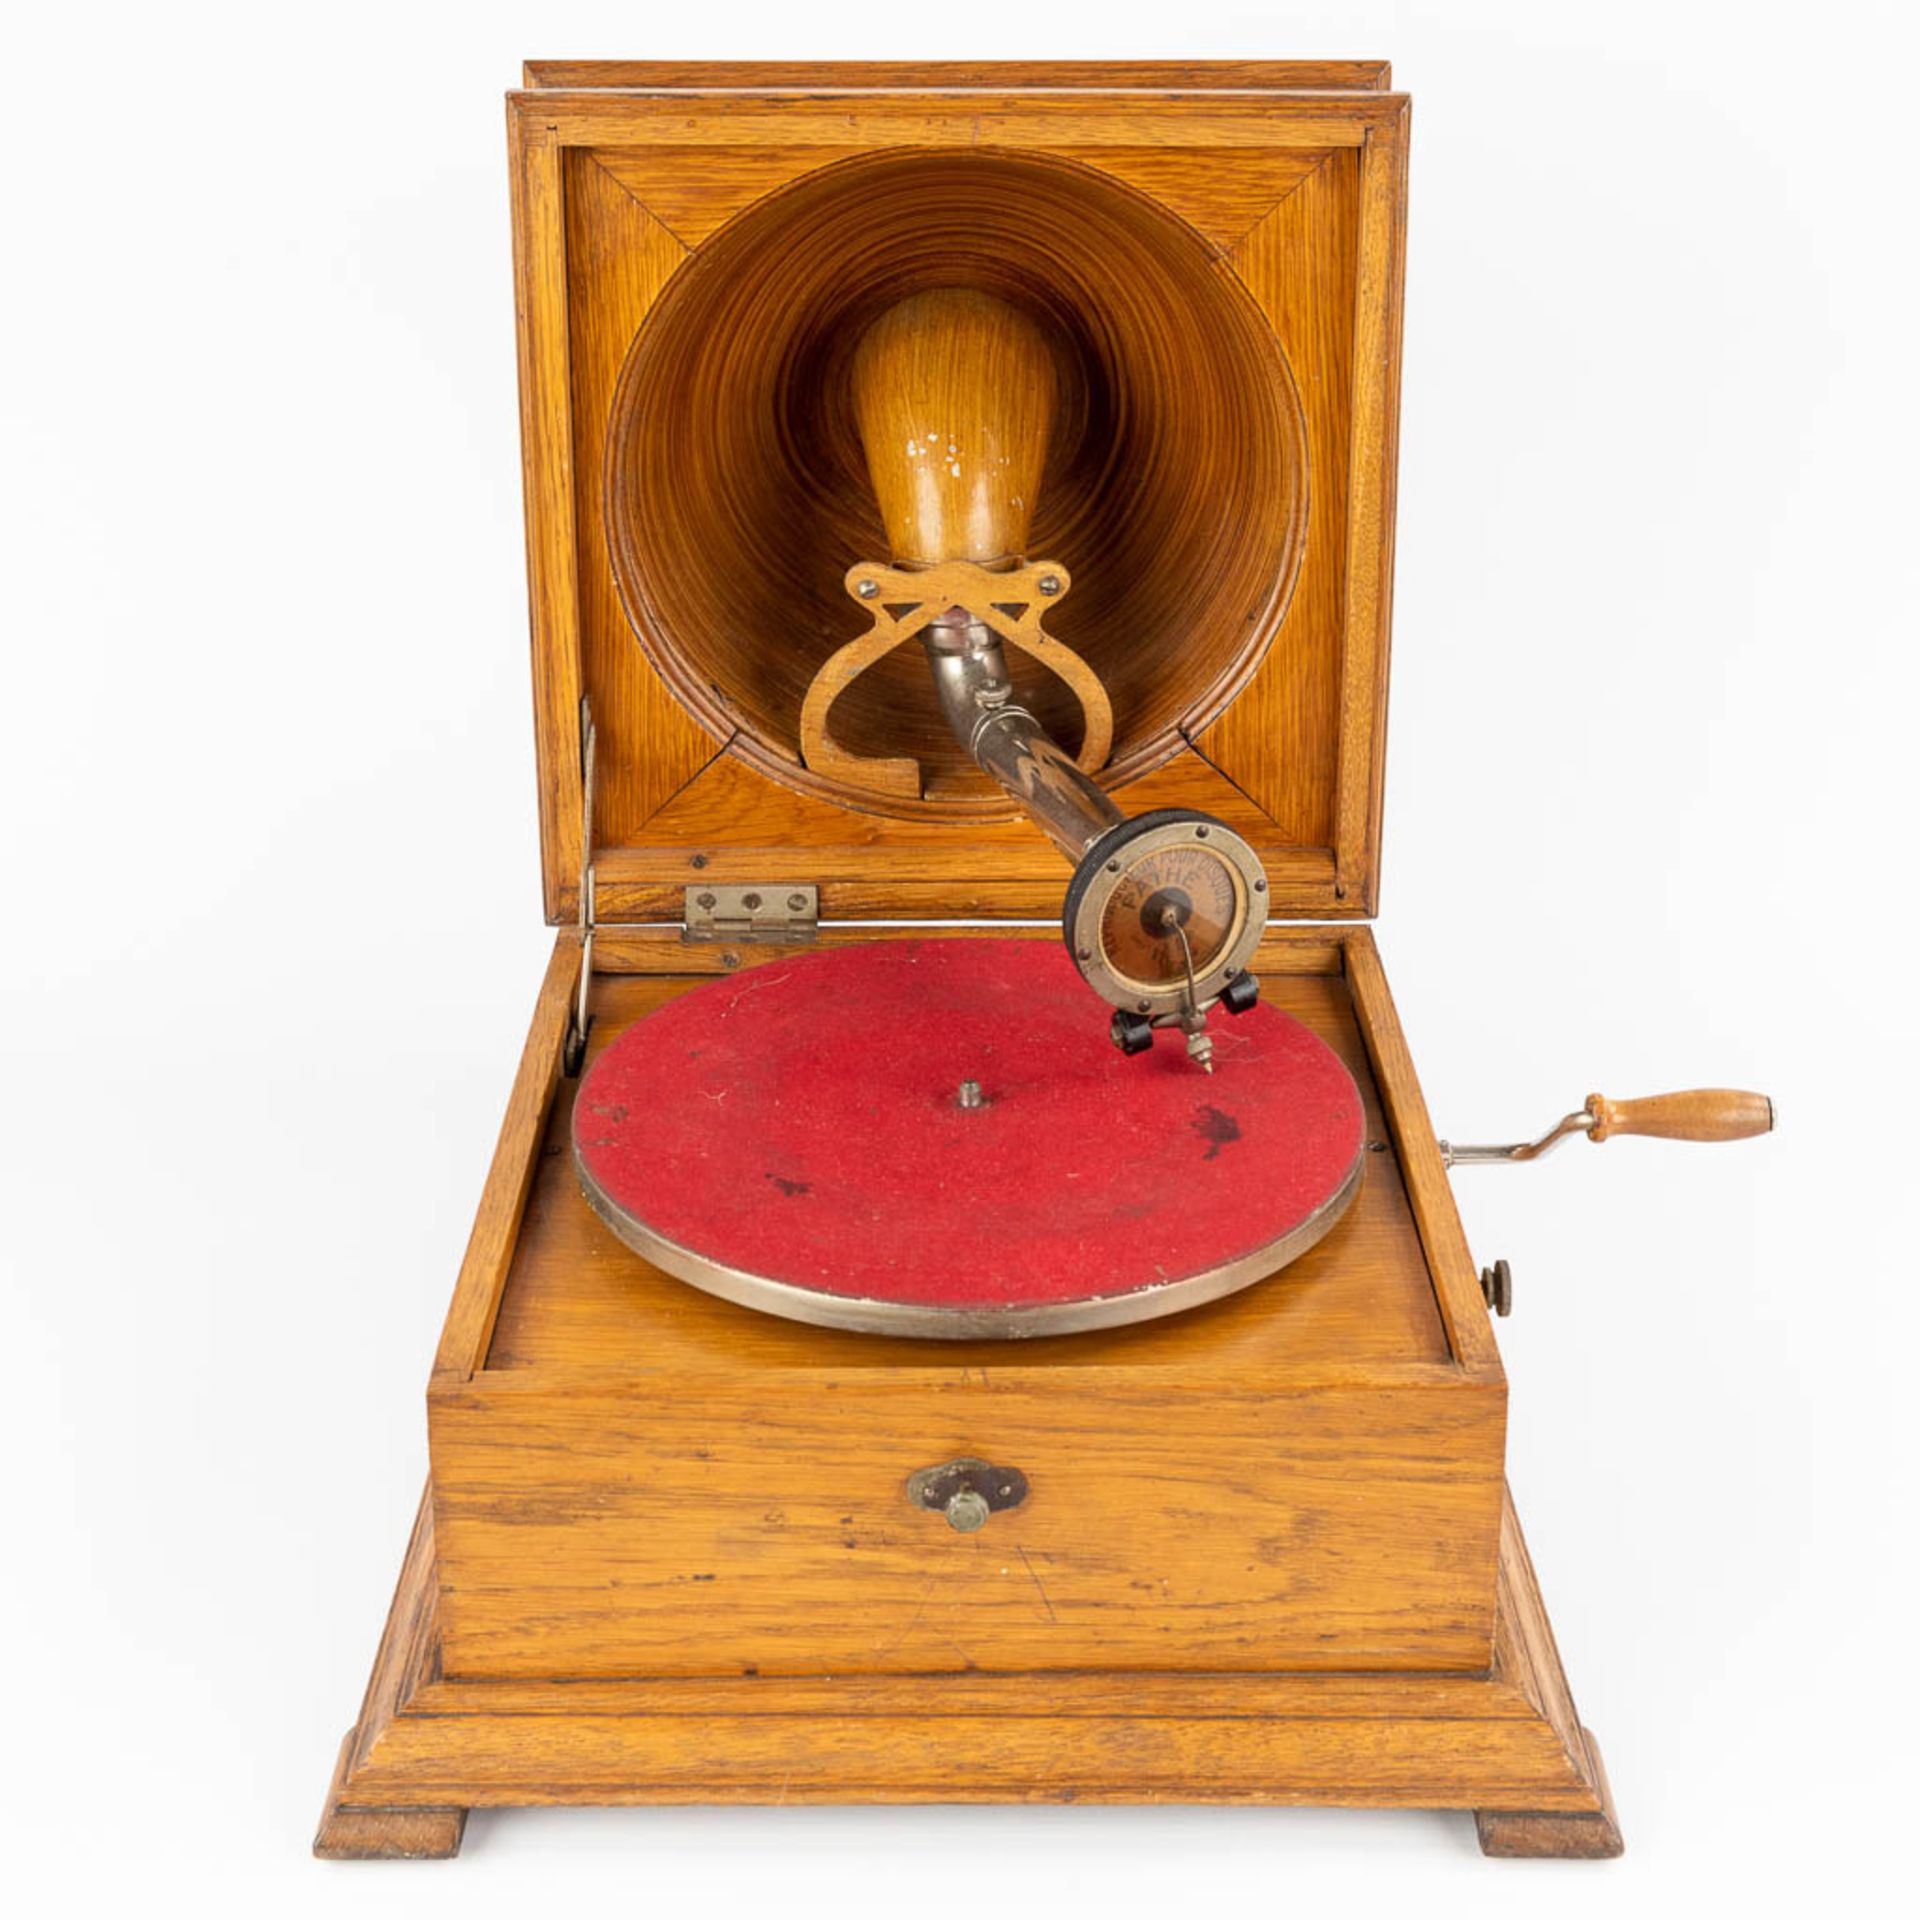 Pathé, a grammophone with bakelite records. The first half of the 20th C. (D:35 x W:35 x H:30 cm) - Image 9 of 16